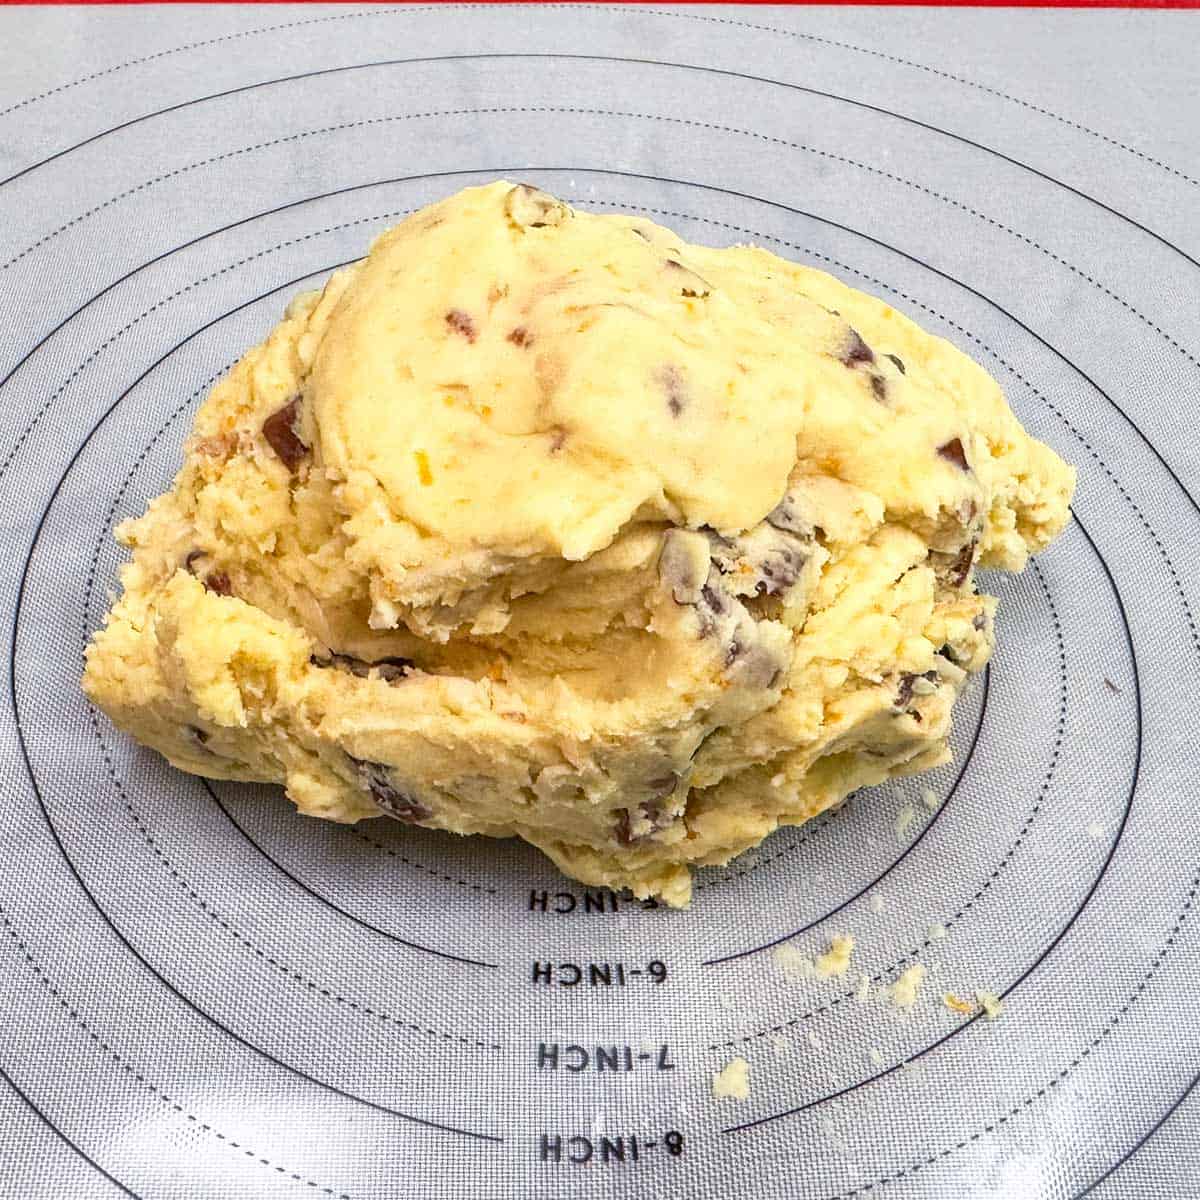 Chilled cookie dough dumped onto a pastry mat.